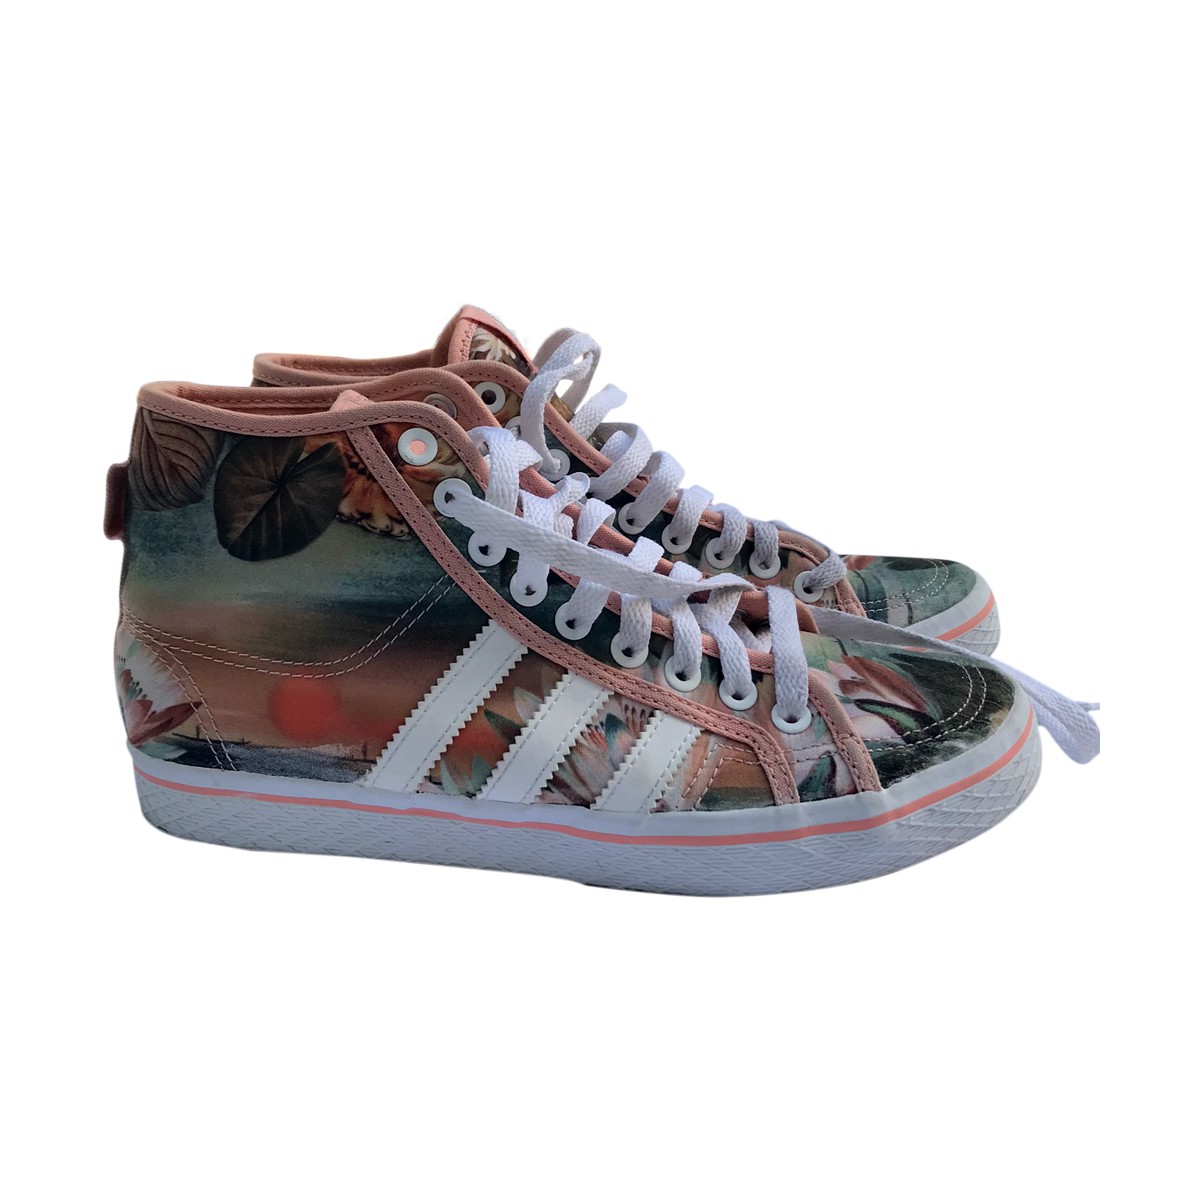 Adidas flower print limited edition trainers | My good closet